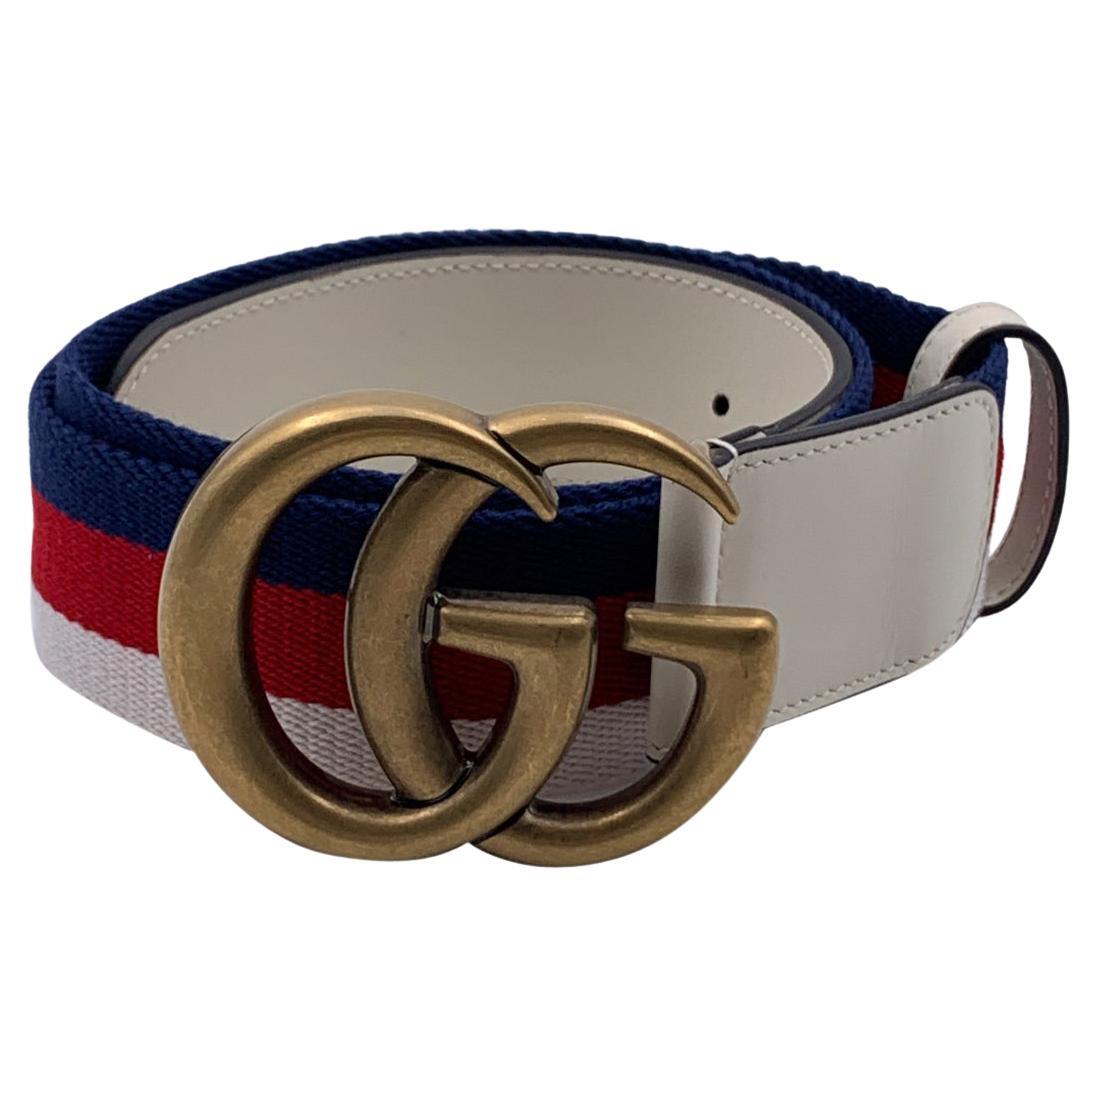 Gucci Blue Red White Striped Marmont Belt with GG Buckle Size 85/34